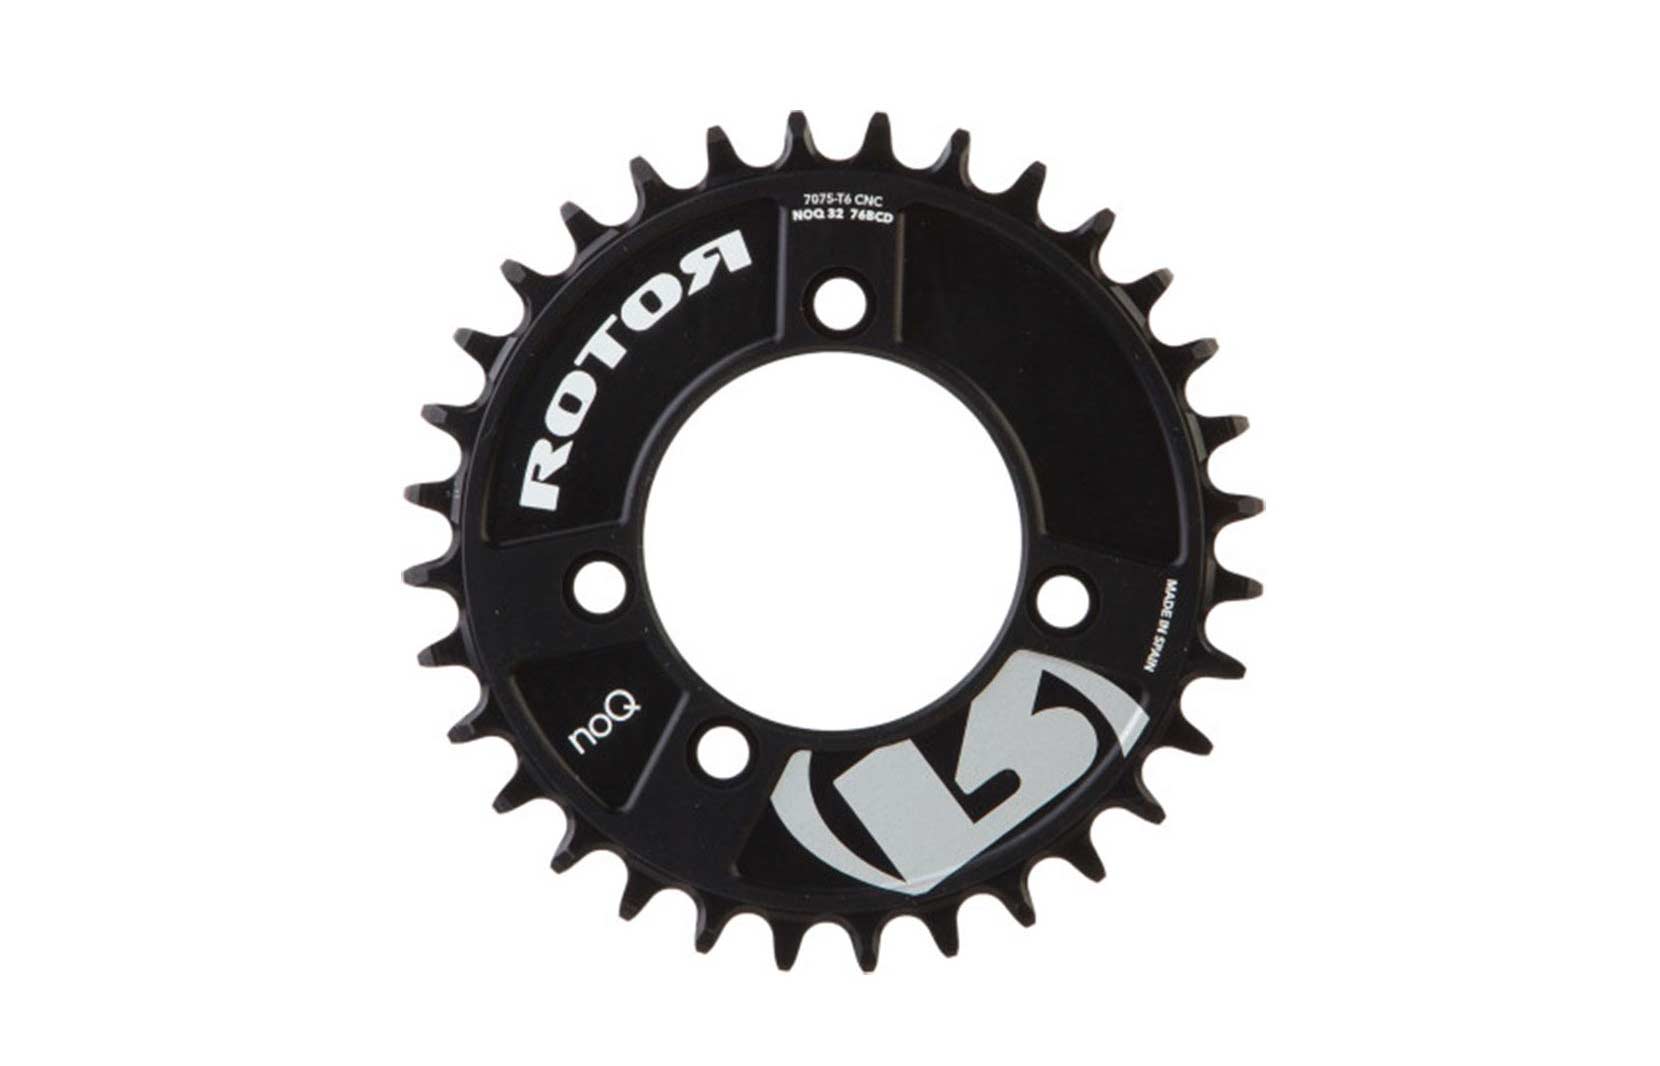 excelleren Carrière Tweet Rotor RX1 Chainring | R&A Cycles